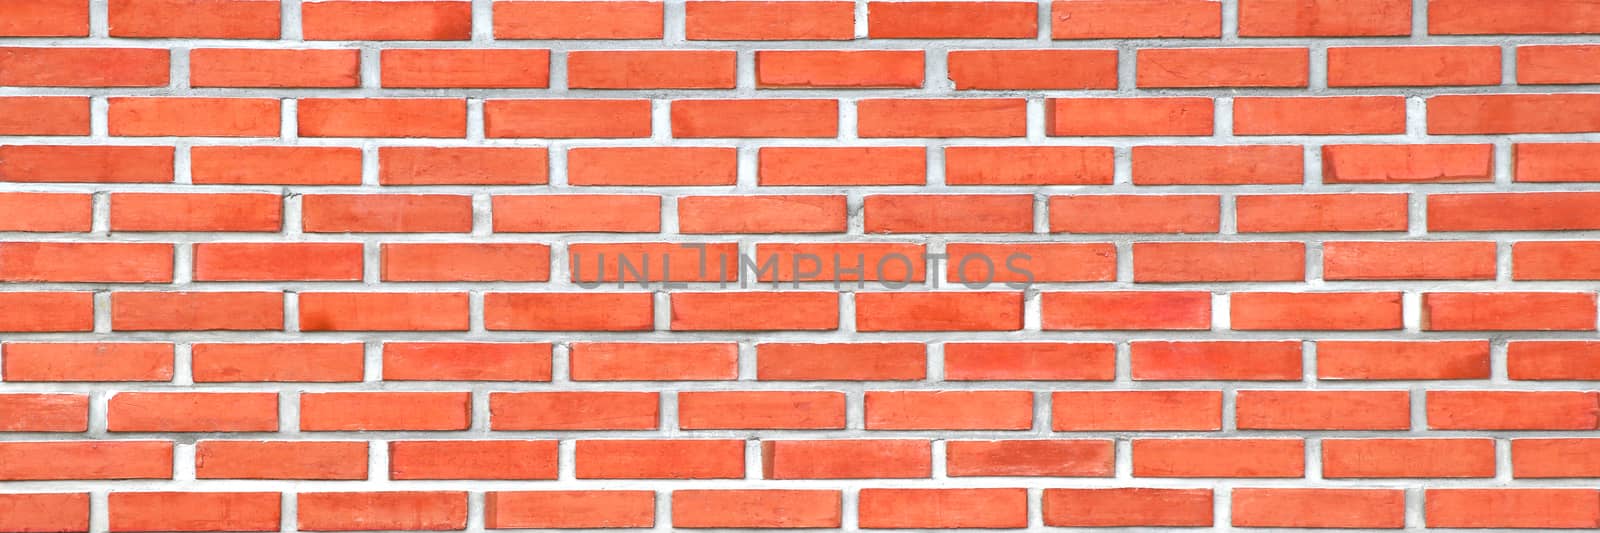 Red brick wall banner background. Brick wall texture background.